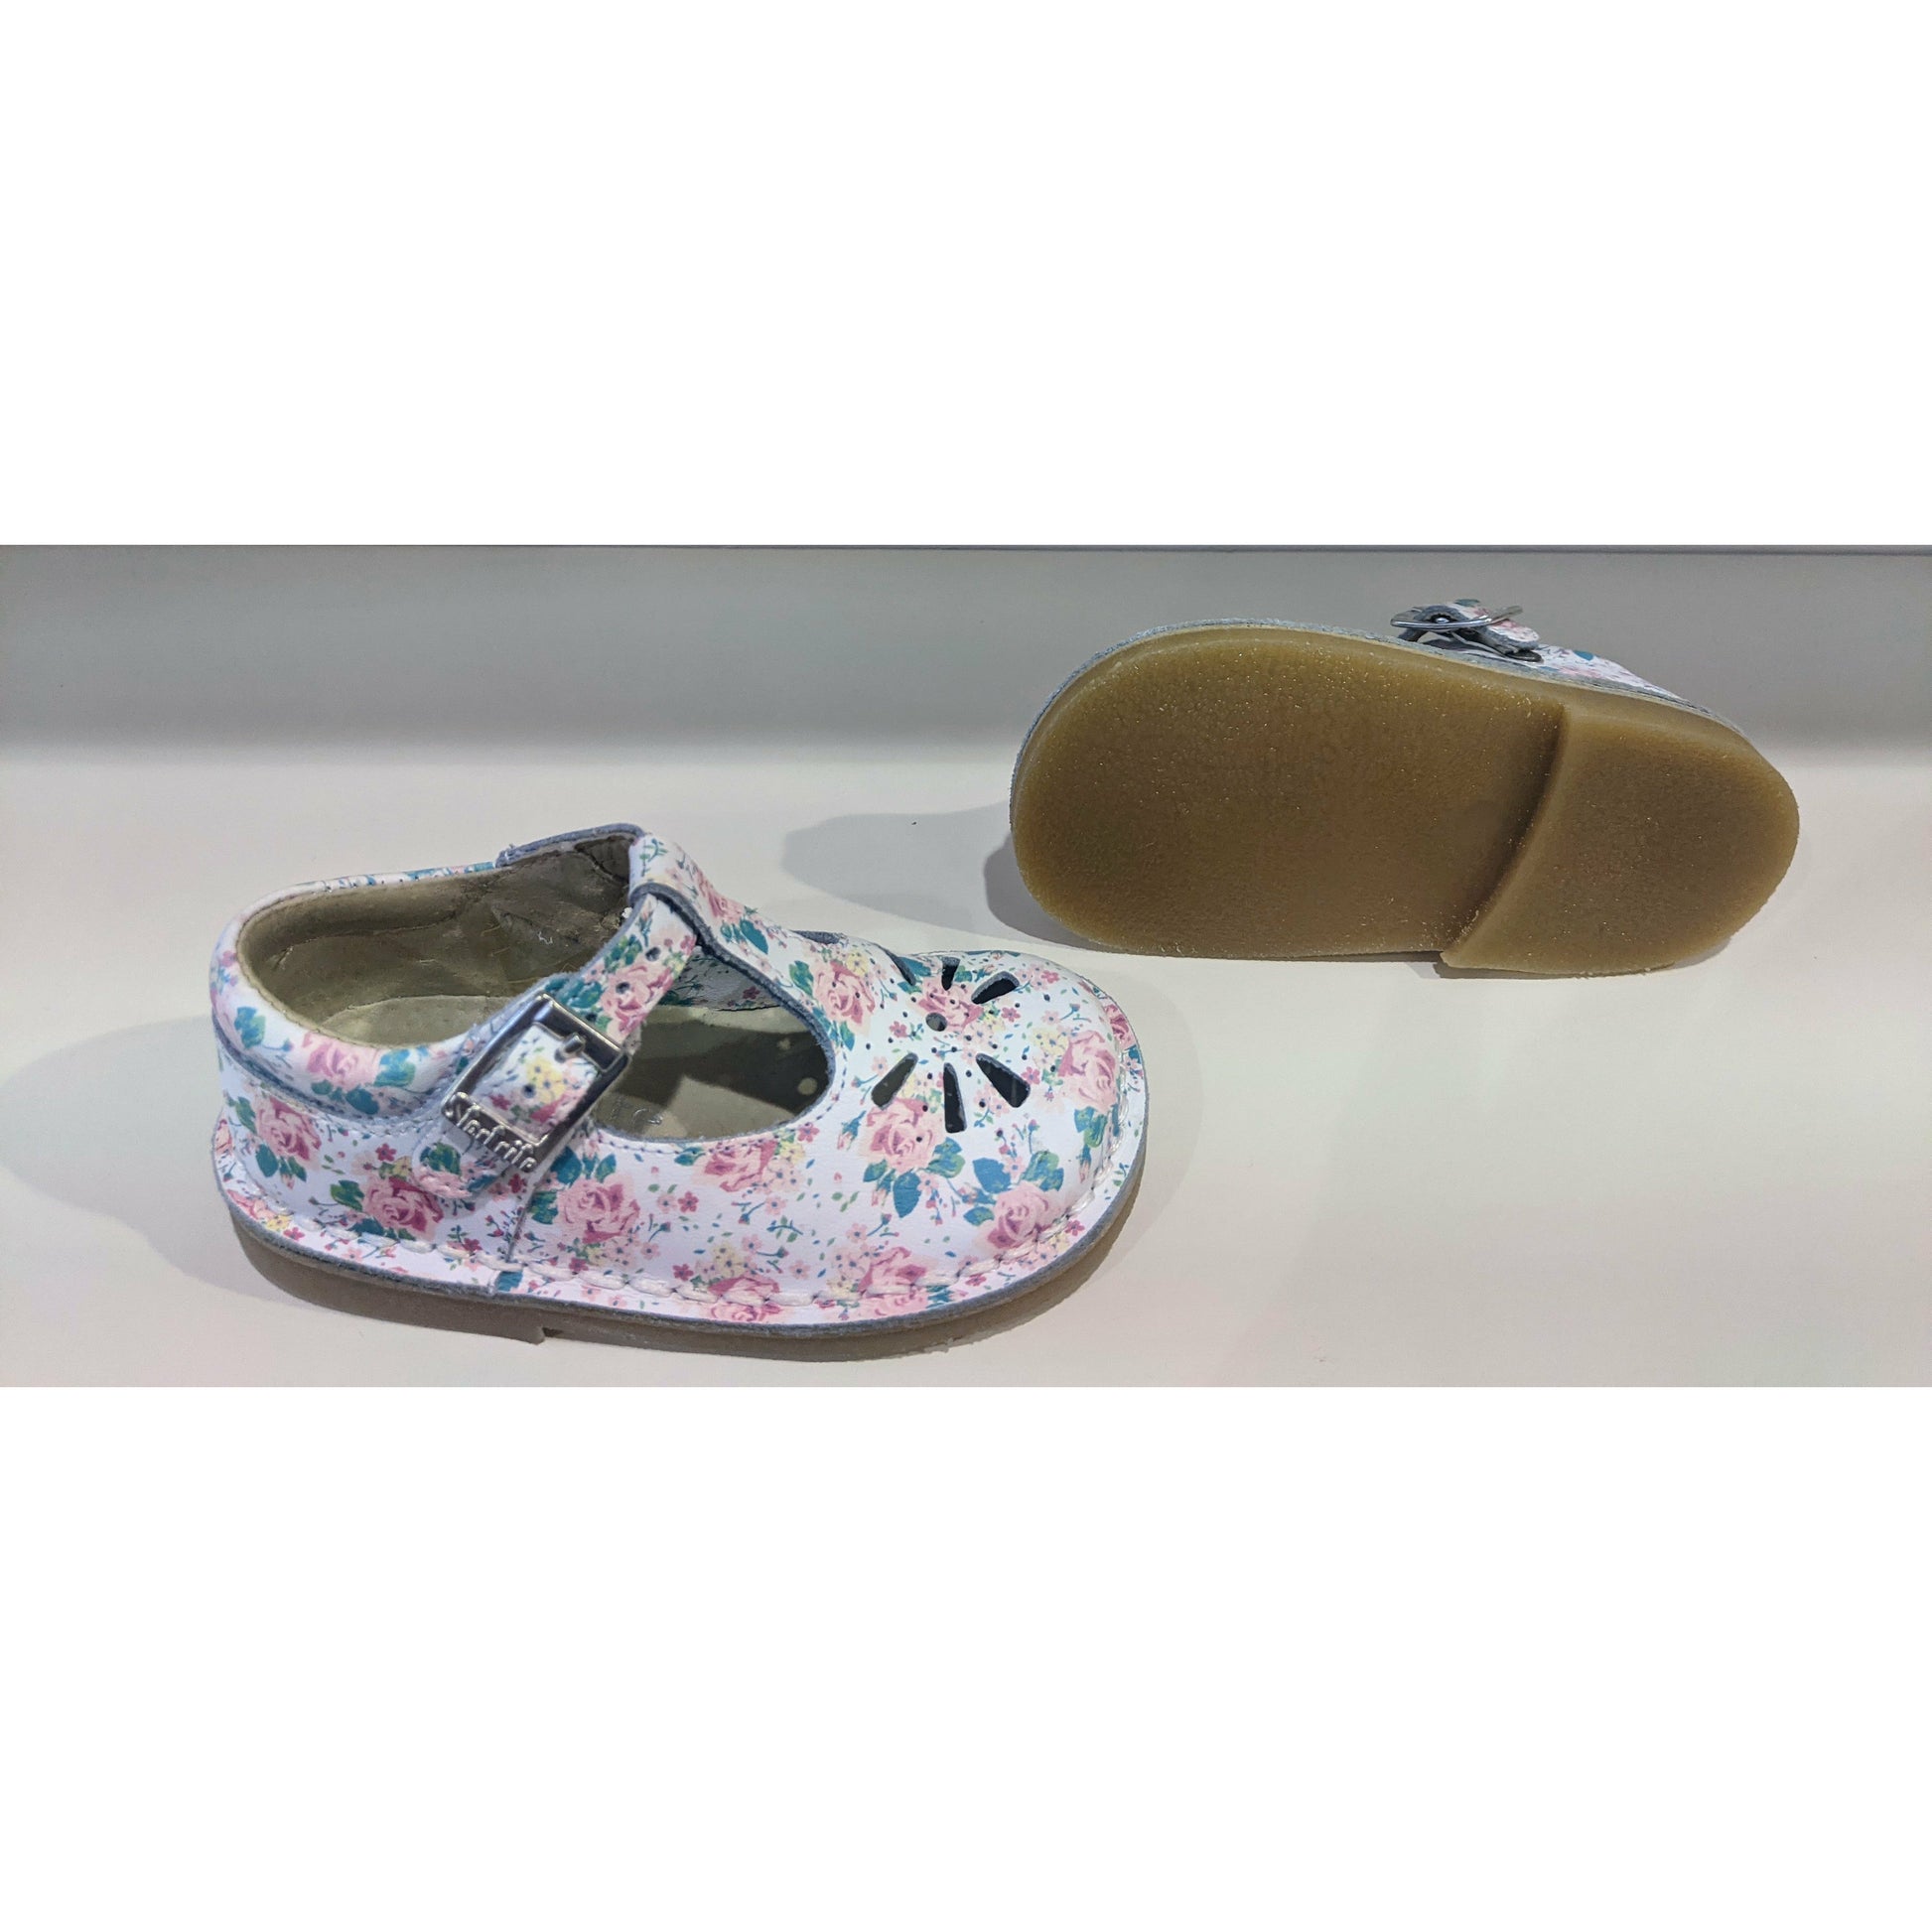 A pair of girls t-bar shoes by Start-Rite, style Lottie, in white floral leather with buckle fastening. Right side/sole view. view